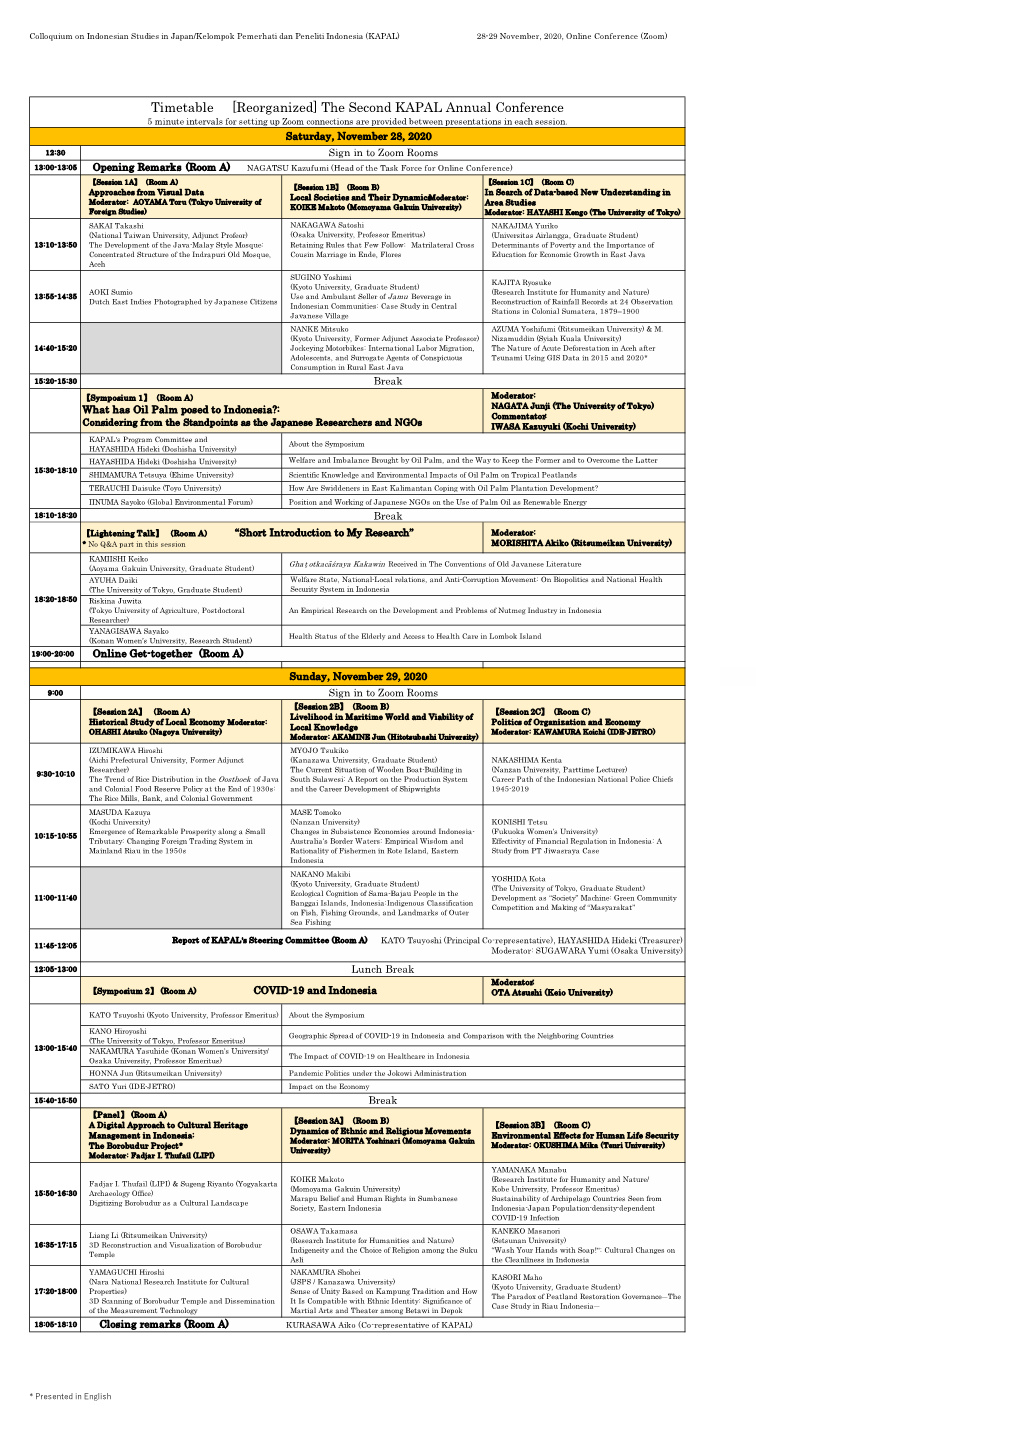 Timetable [Reorganized] the Second KAPAL Annual Conference 5 Minute Intervals for Setting up Zoom Connections Are Provided Between Presentations in Each Session